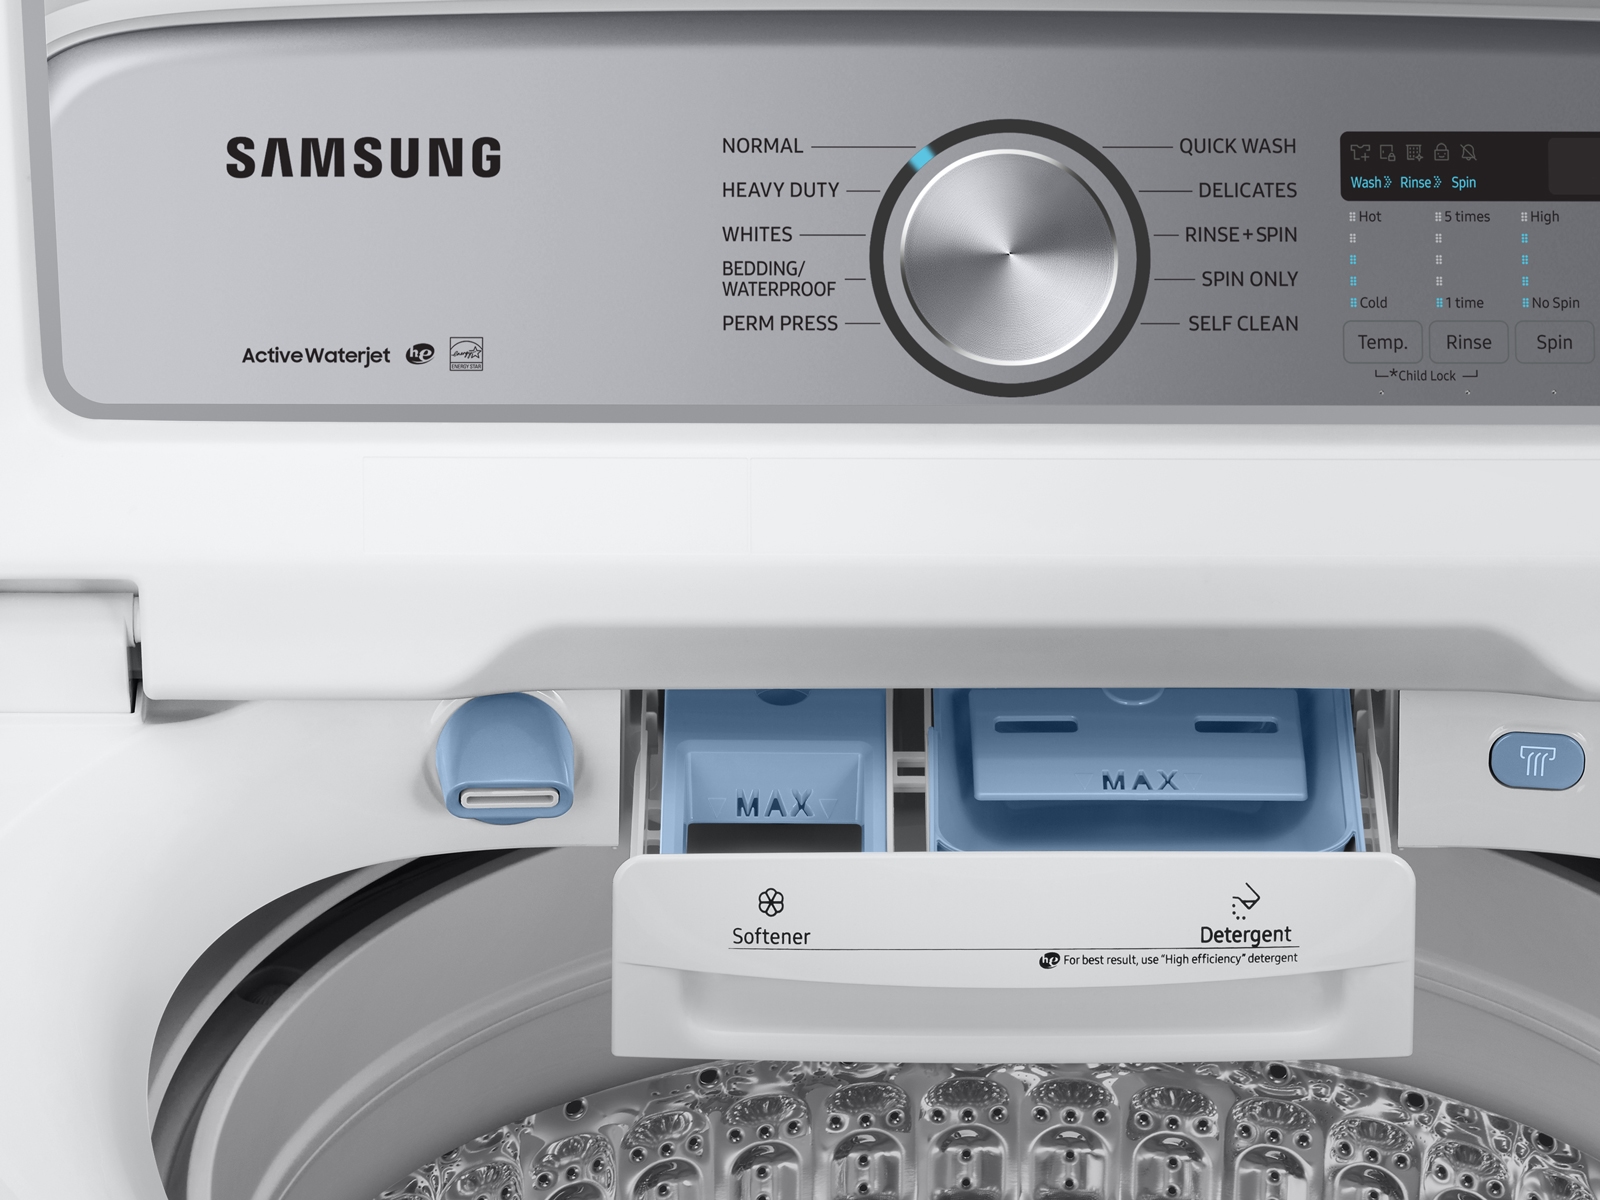 https://image-us.samsung.com/SamsungUS/home/home-appliances/washers/top-load/pd/wa50r5200aw/WA50R5200AW-US_011_Water-Jet-Detail3_White.jpg?$product-details-jpg$